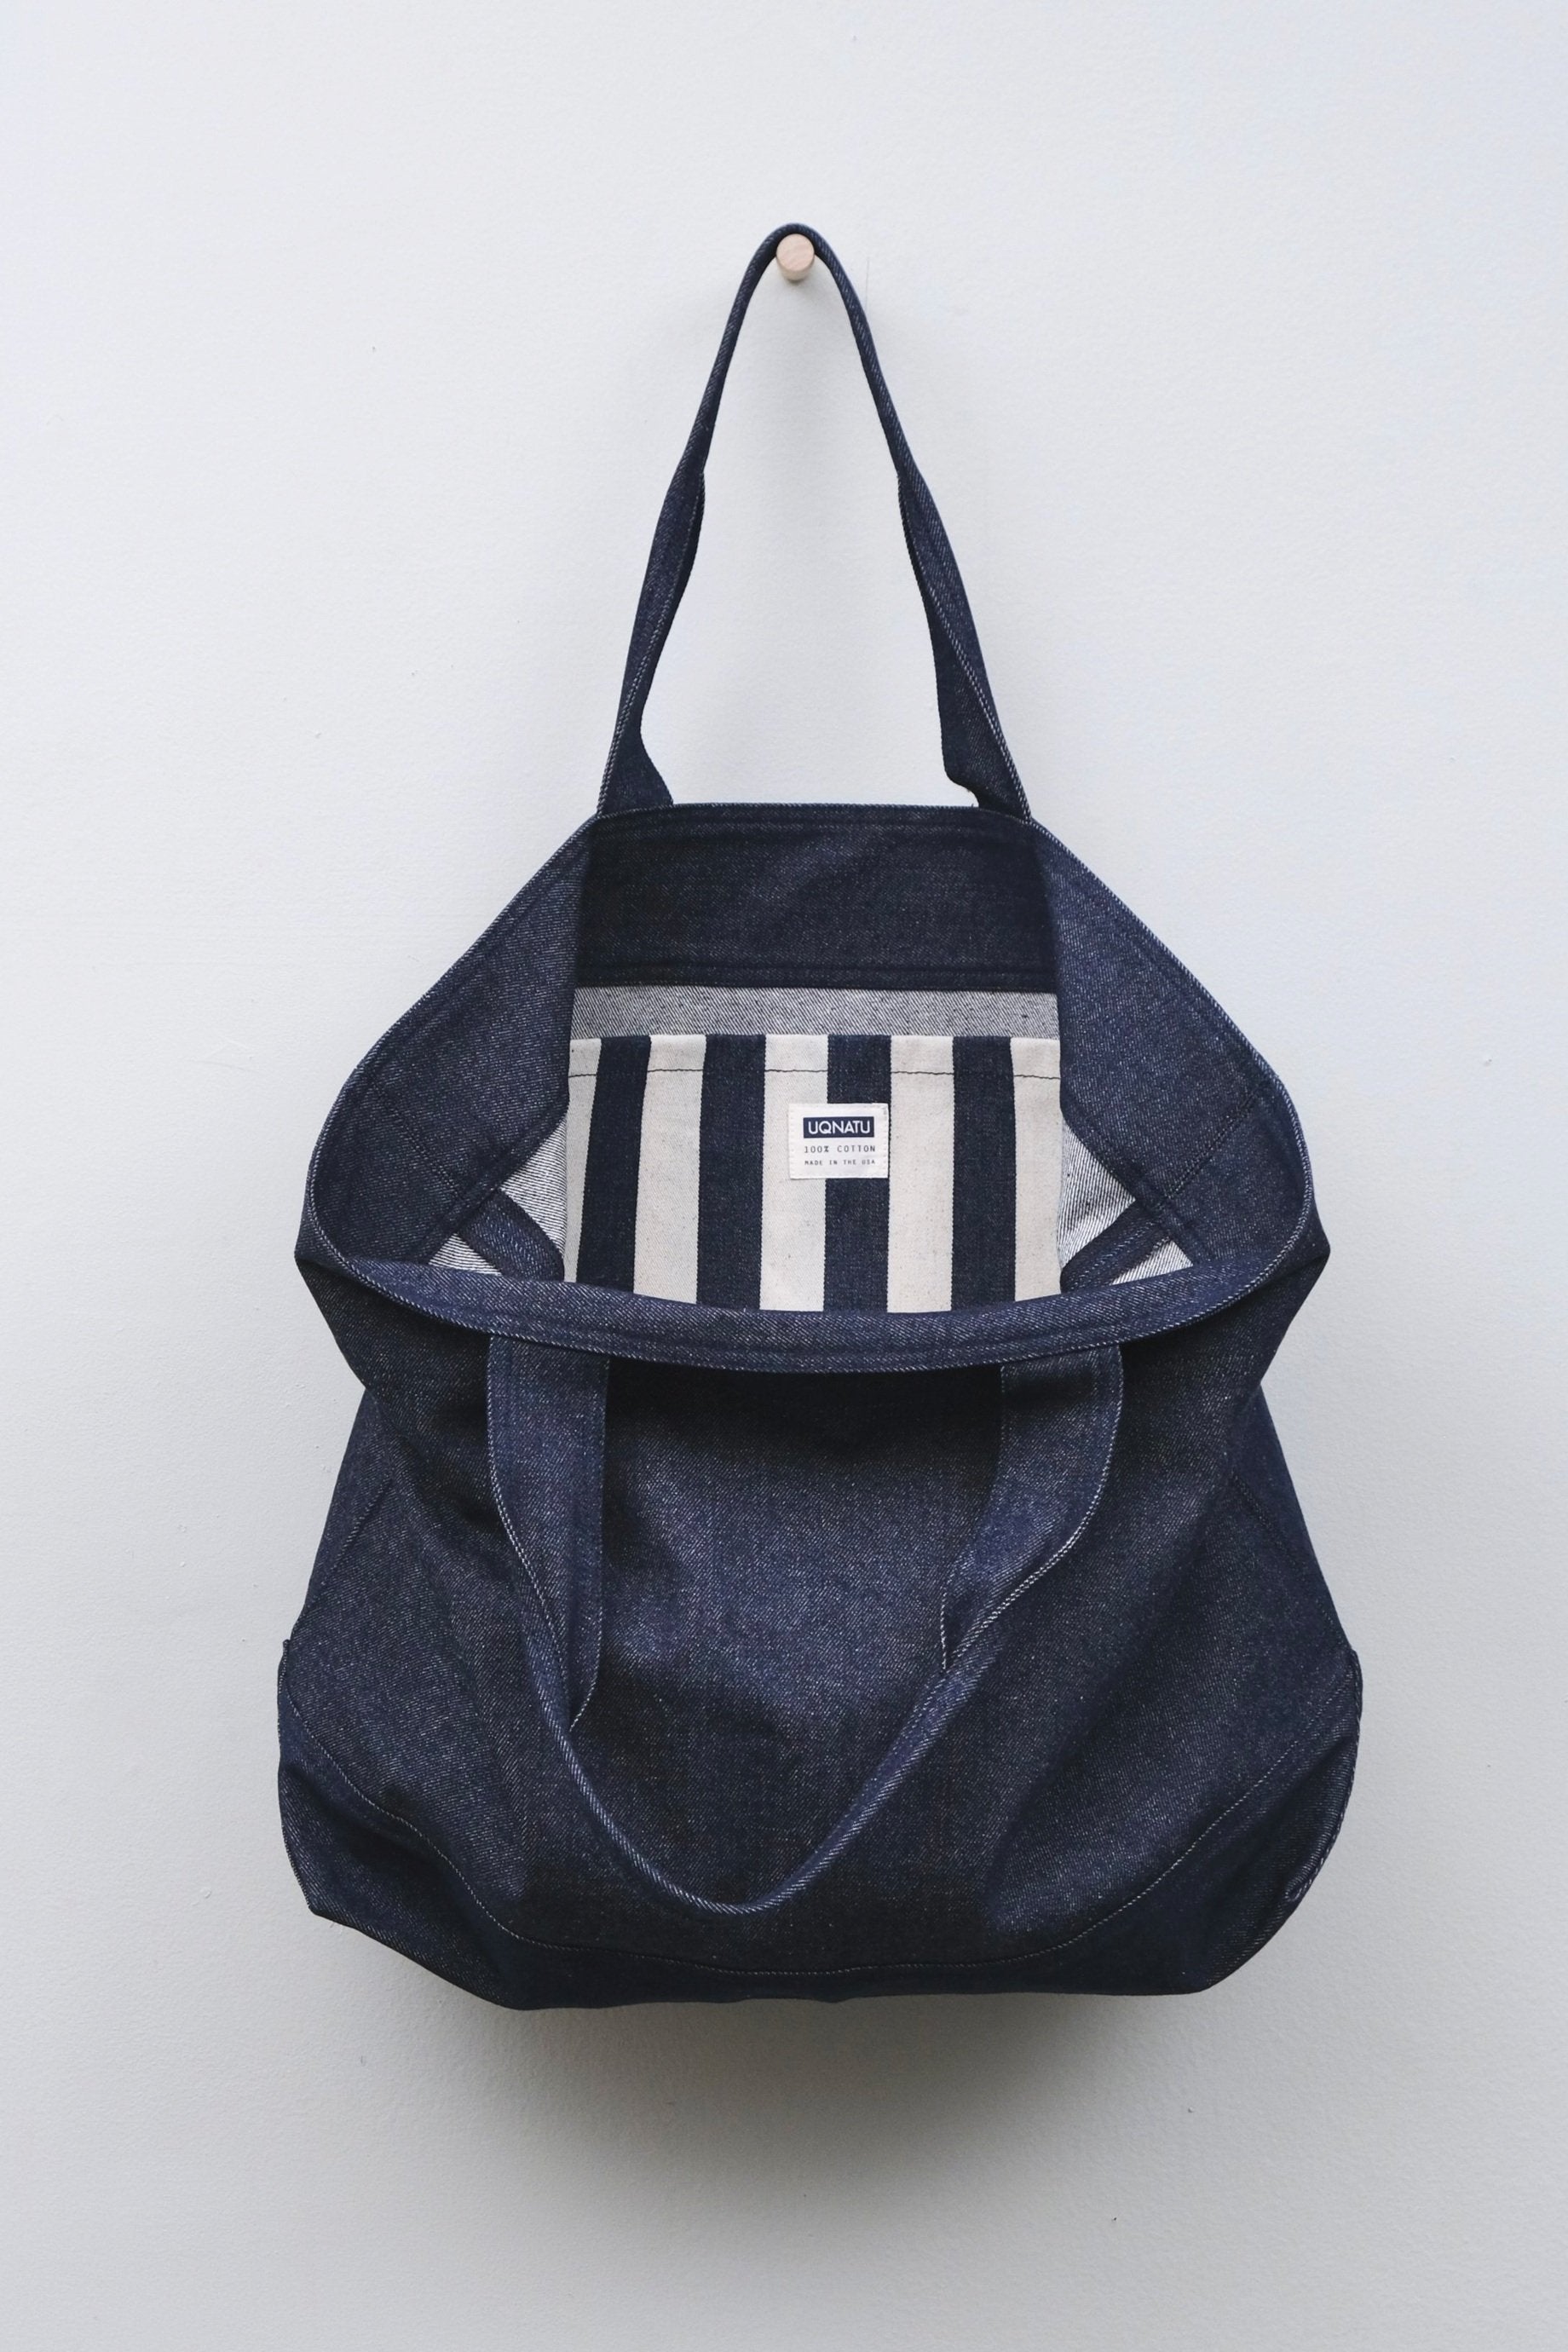 Denim tote bag • Compare (100+ products) see prices »